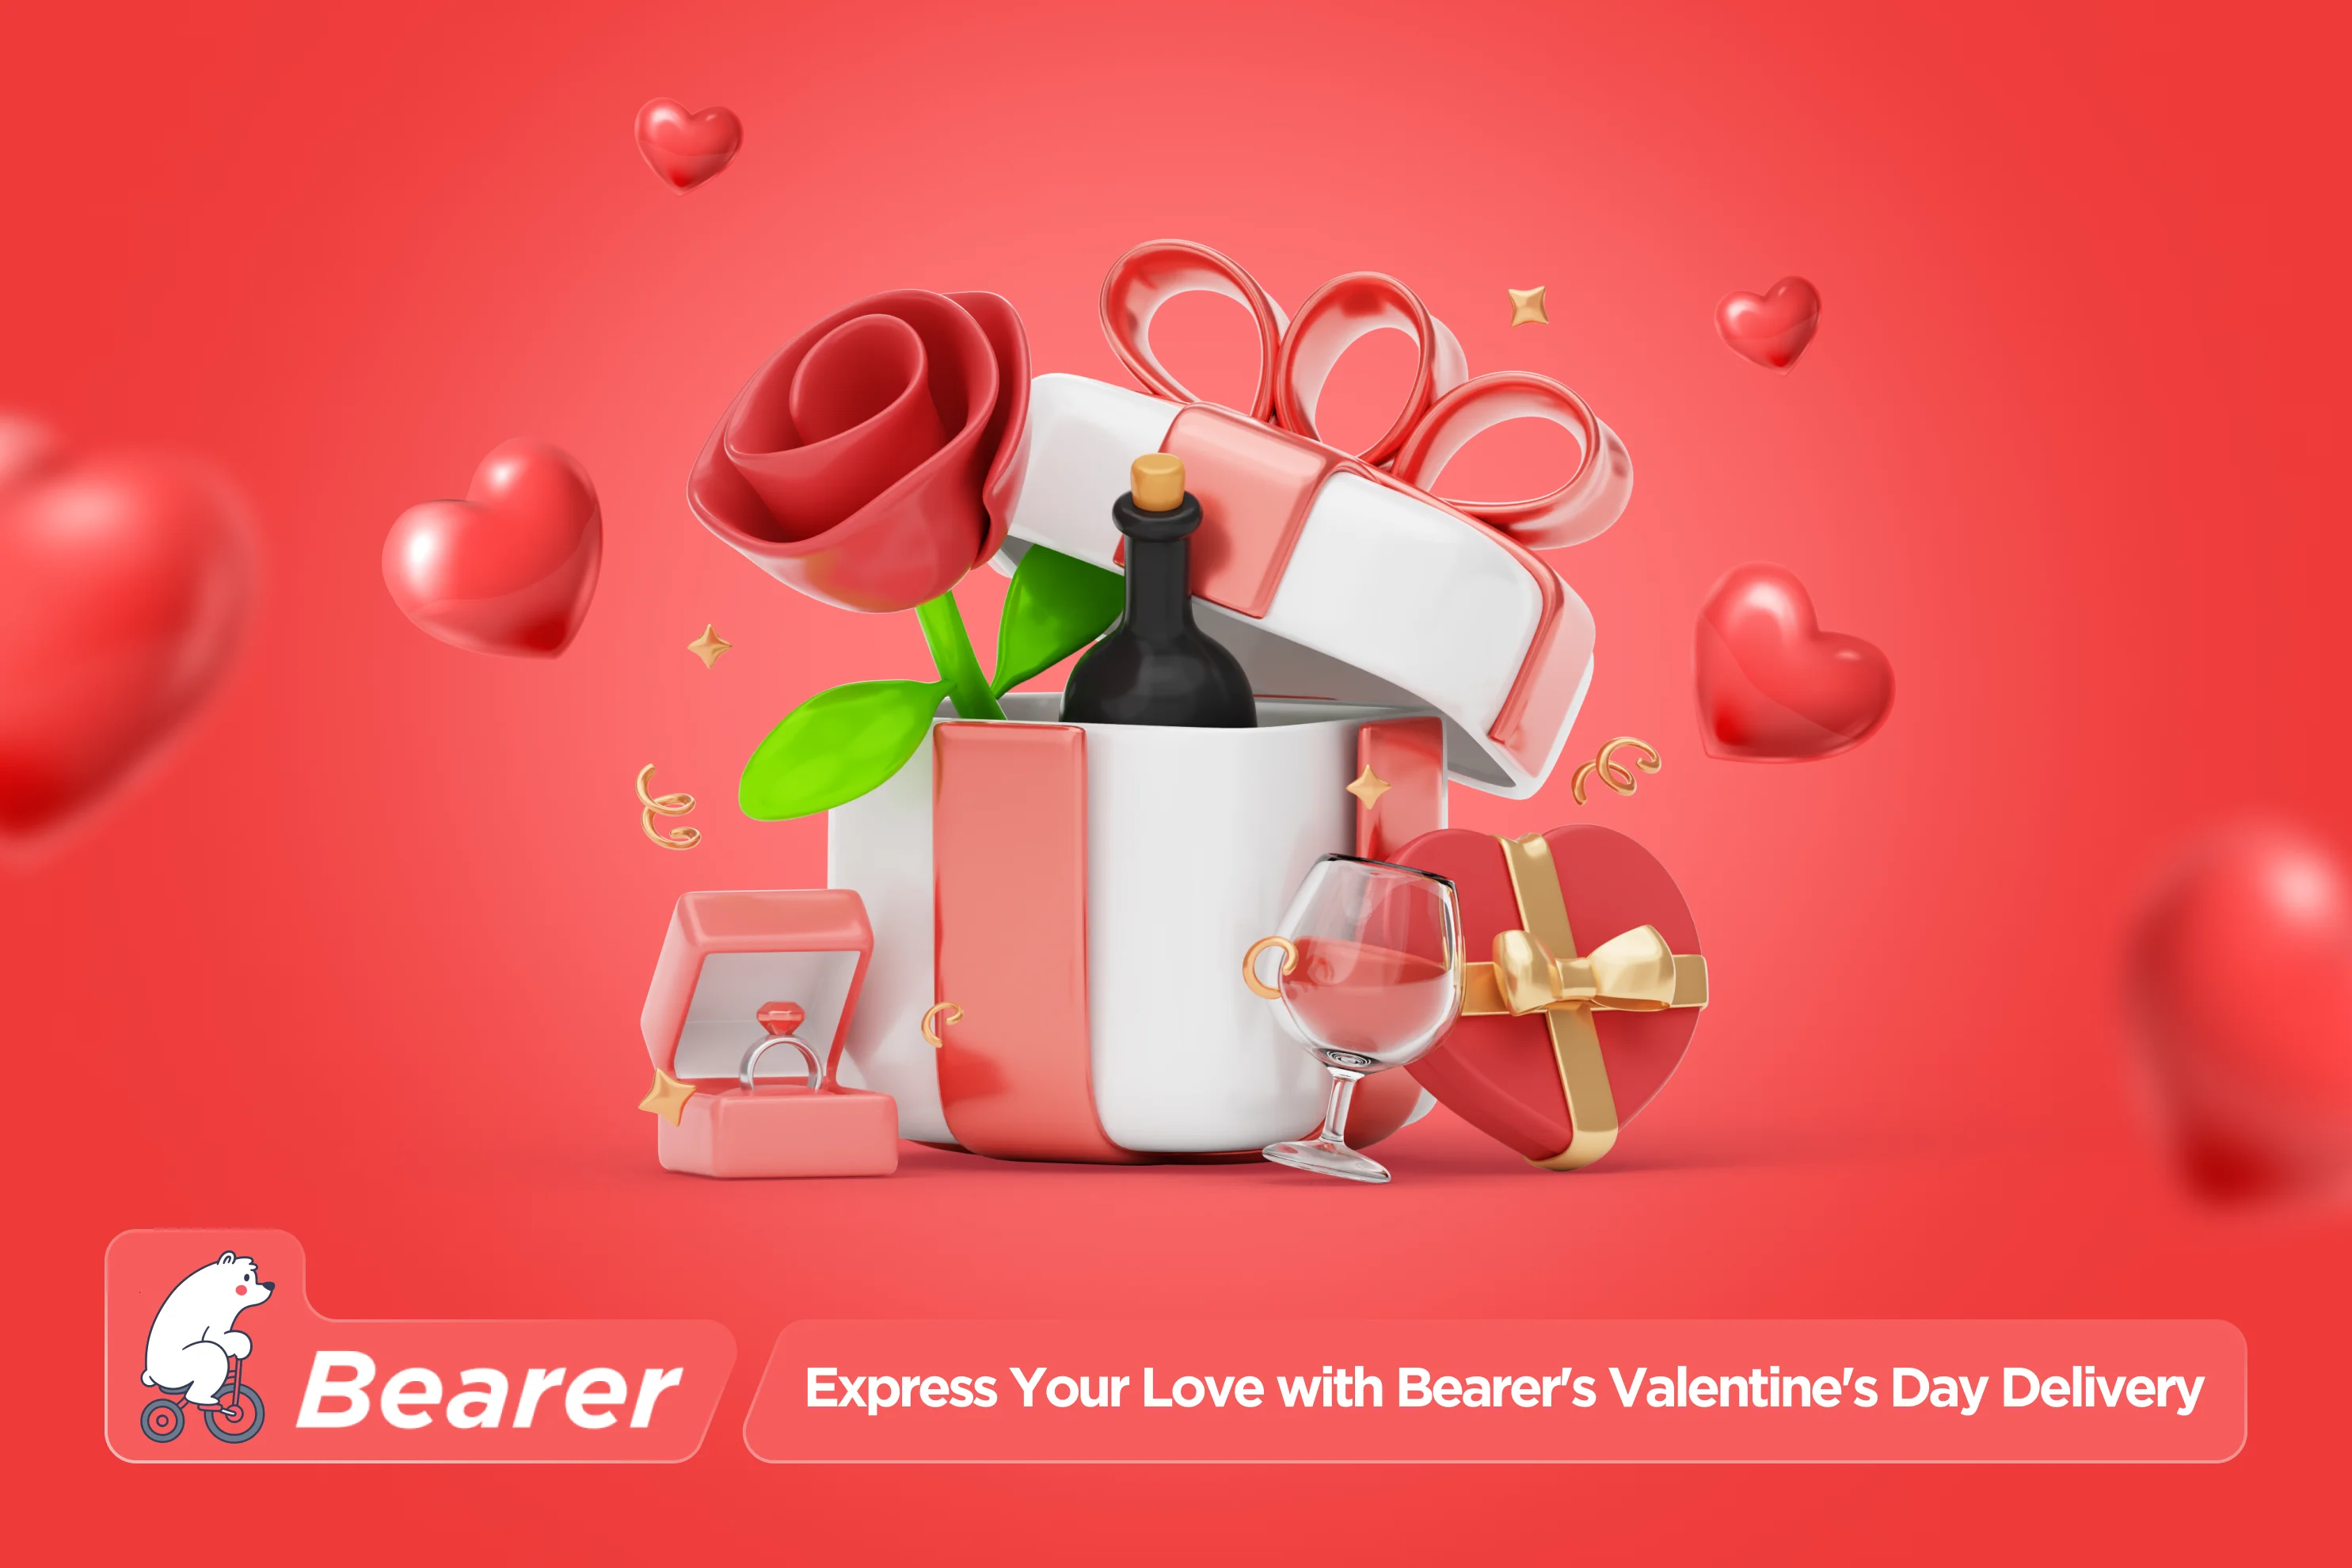 Express Your Love with Bearer's Valentine's Day Delivery